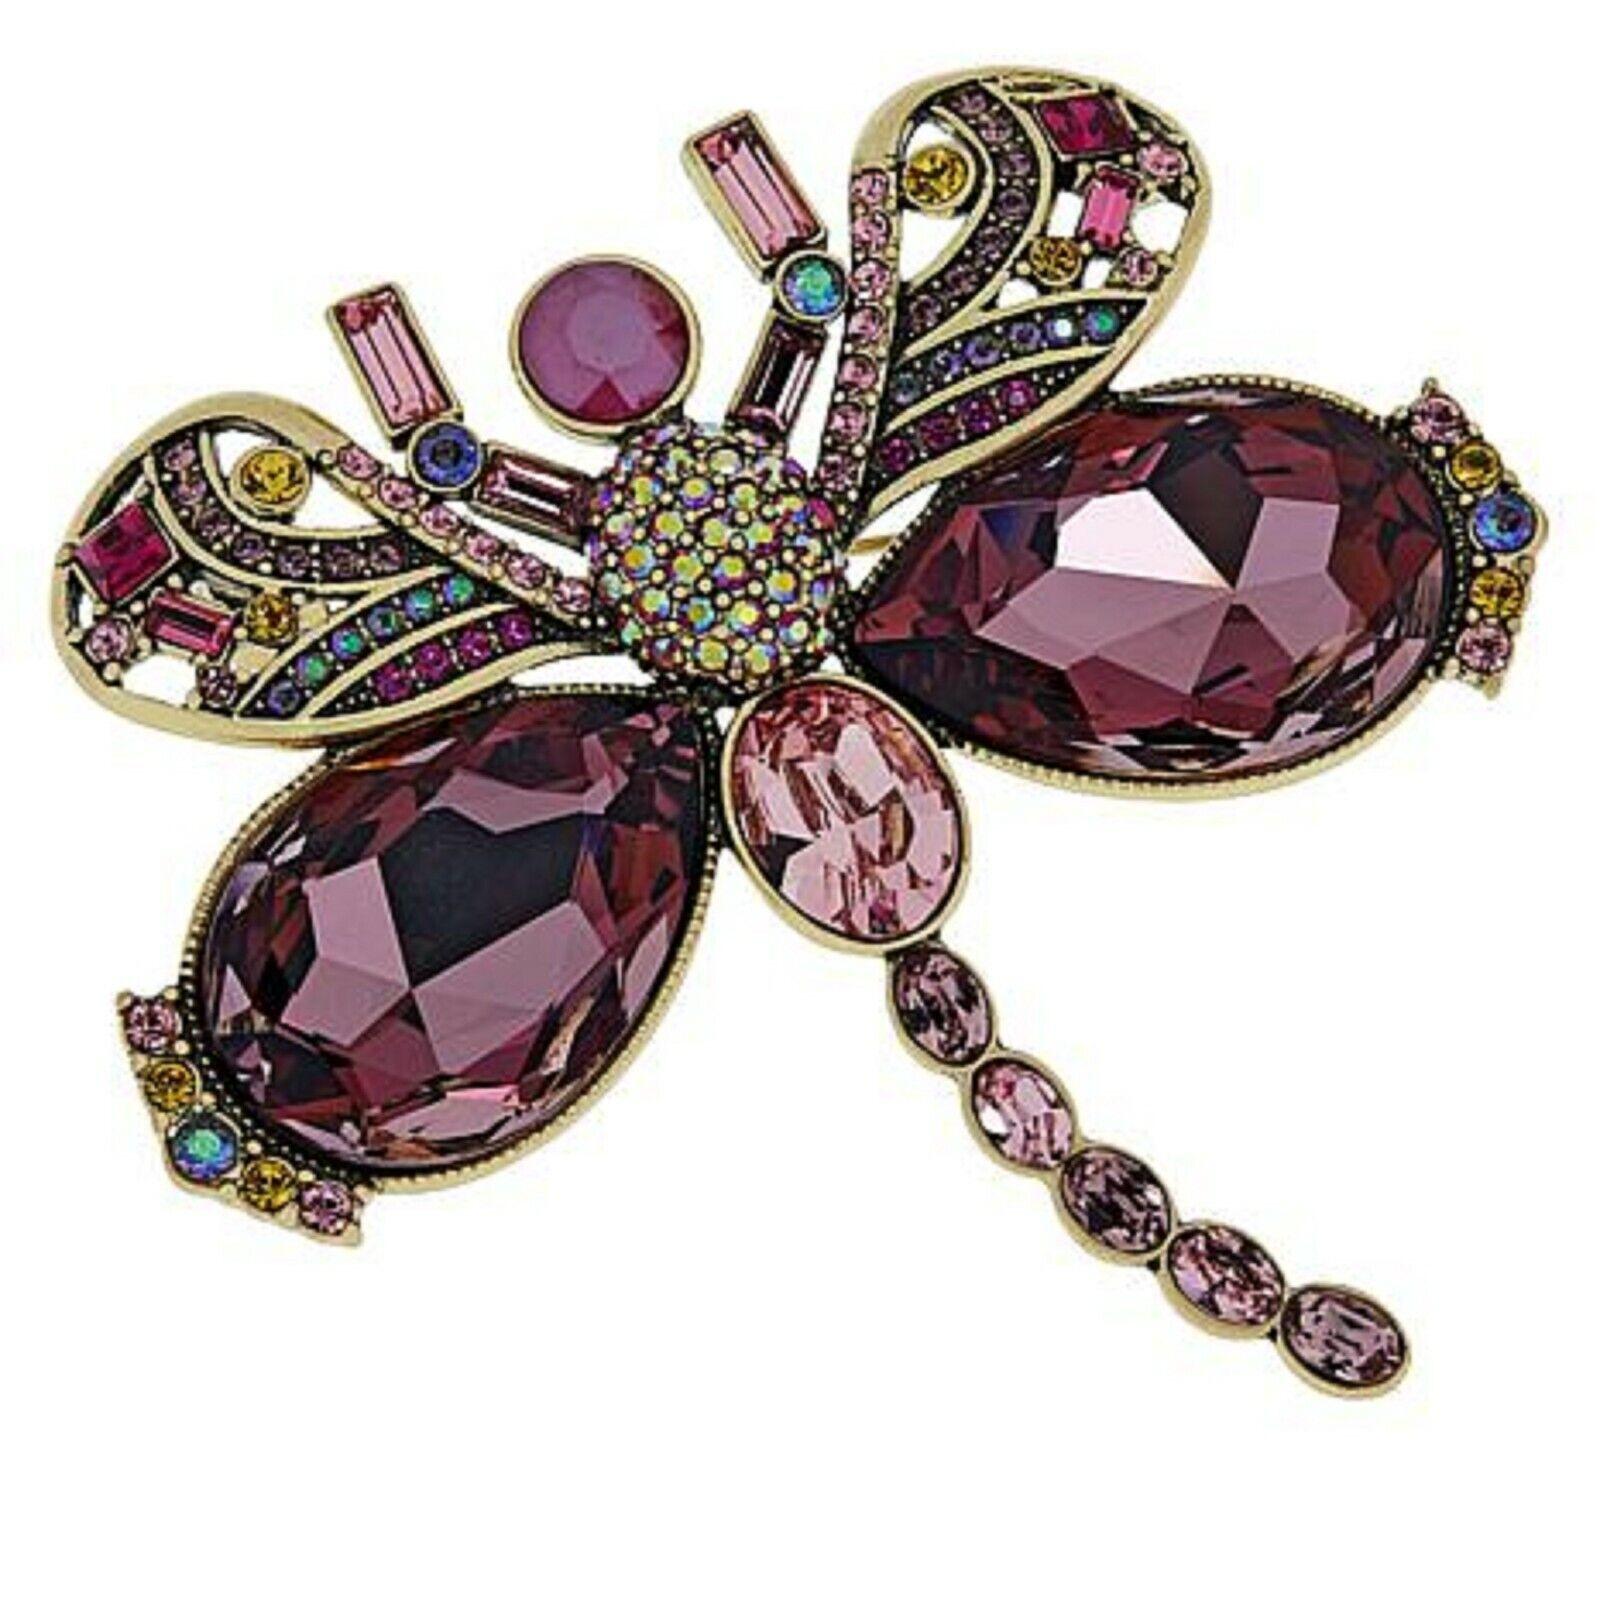 Critter craze! This jeweled interpretation of your favorite flying creature will set your heart aflutter. Pinned to your lapel, a pretty scarf or even your handbag, the whimsical demoiselle (dragonfly) design is sure to sparkle day or night.

Design